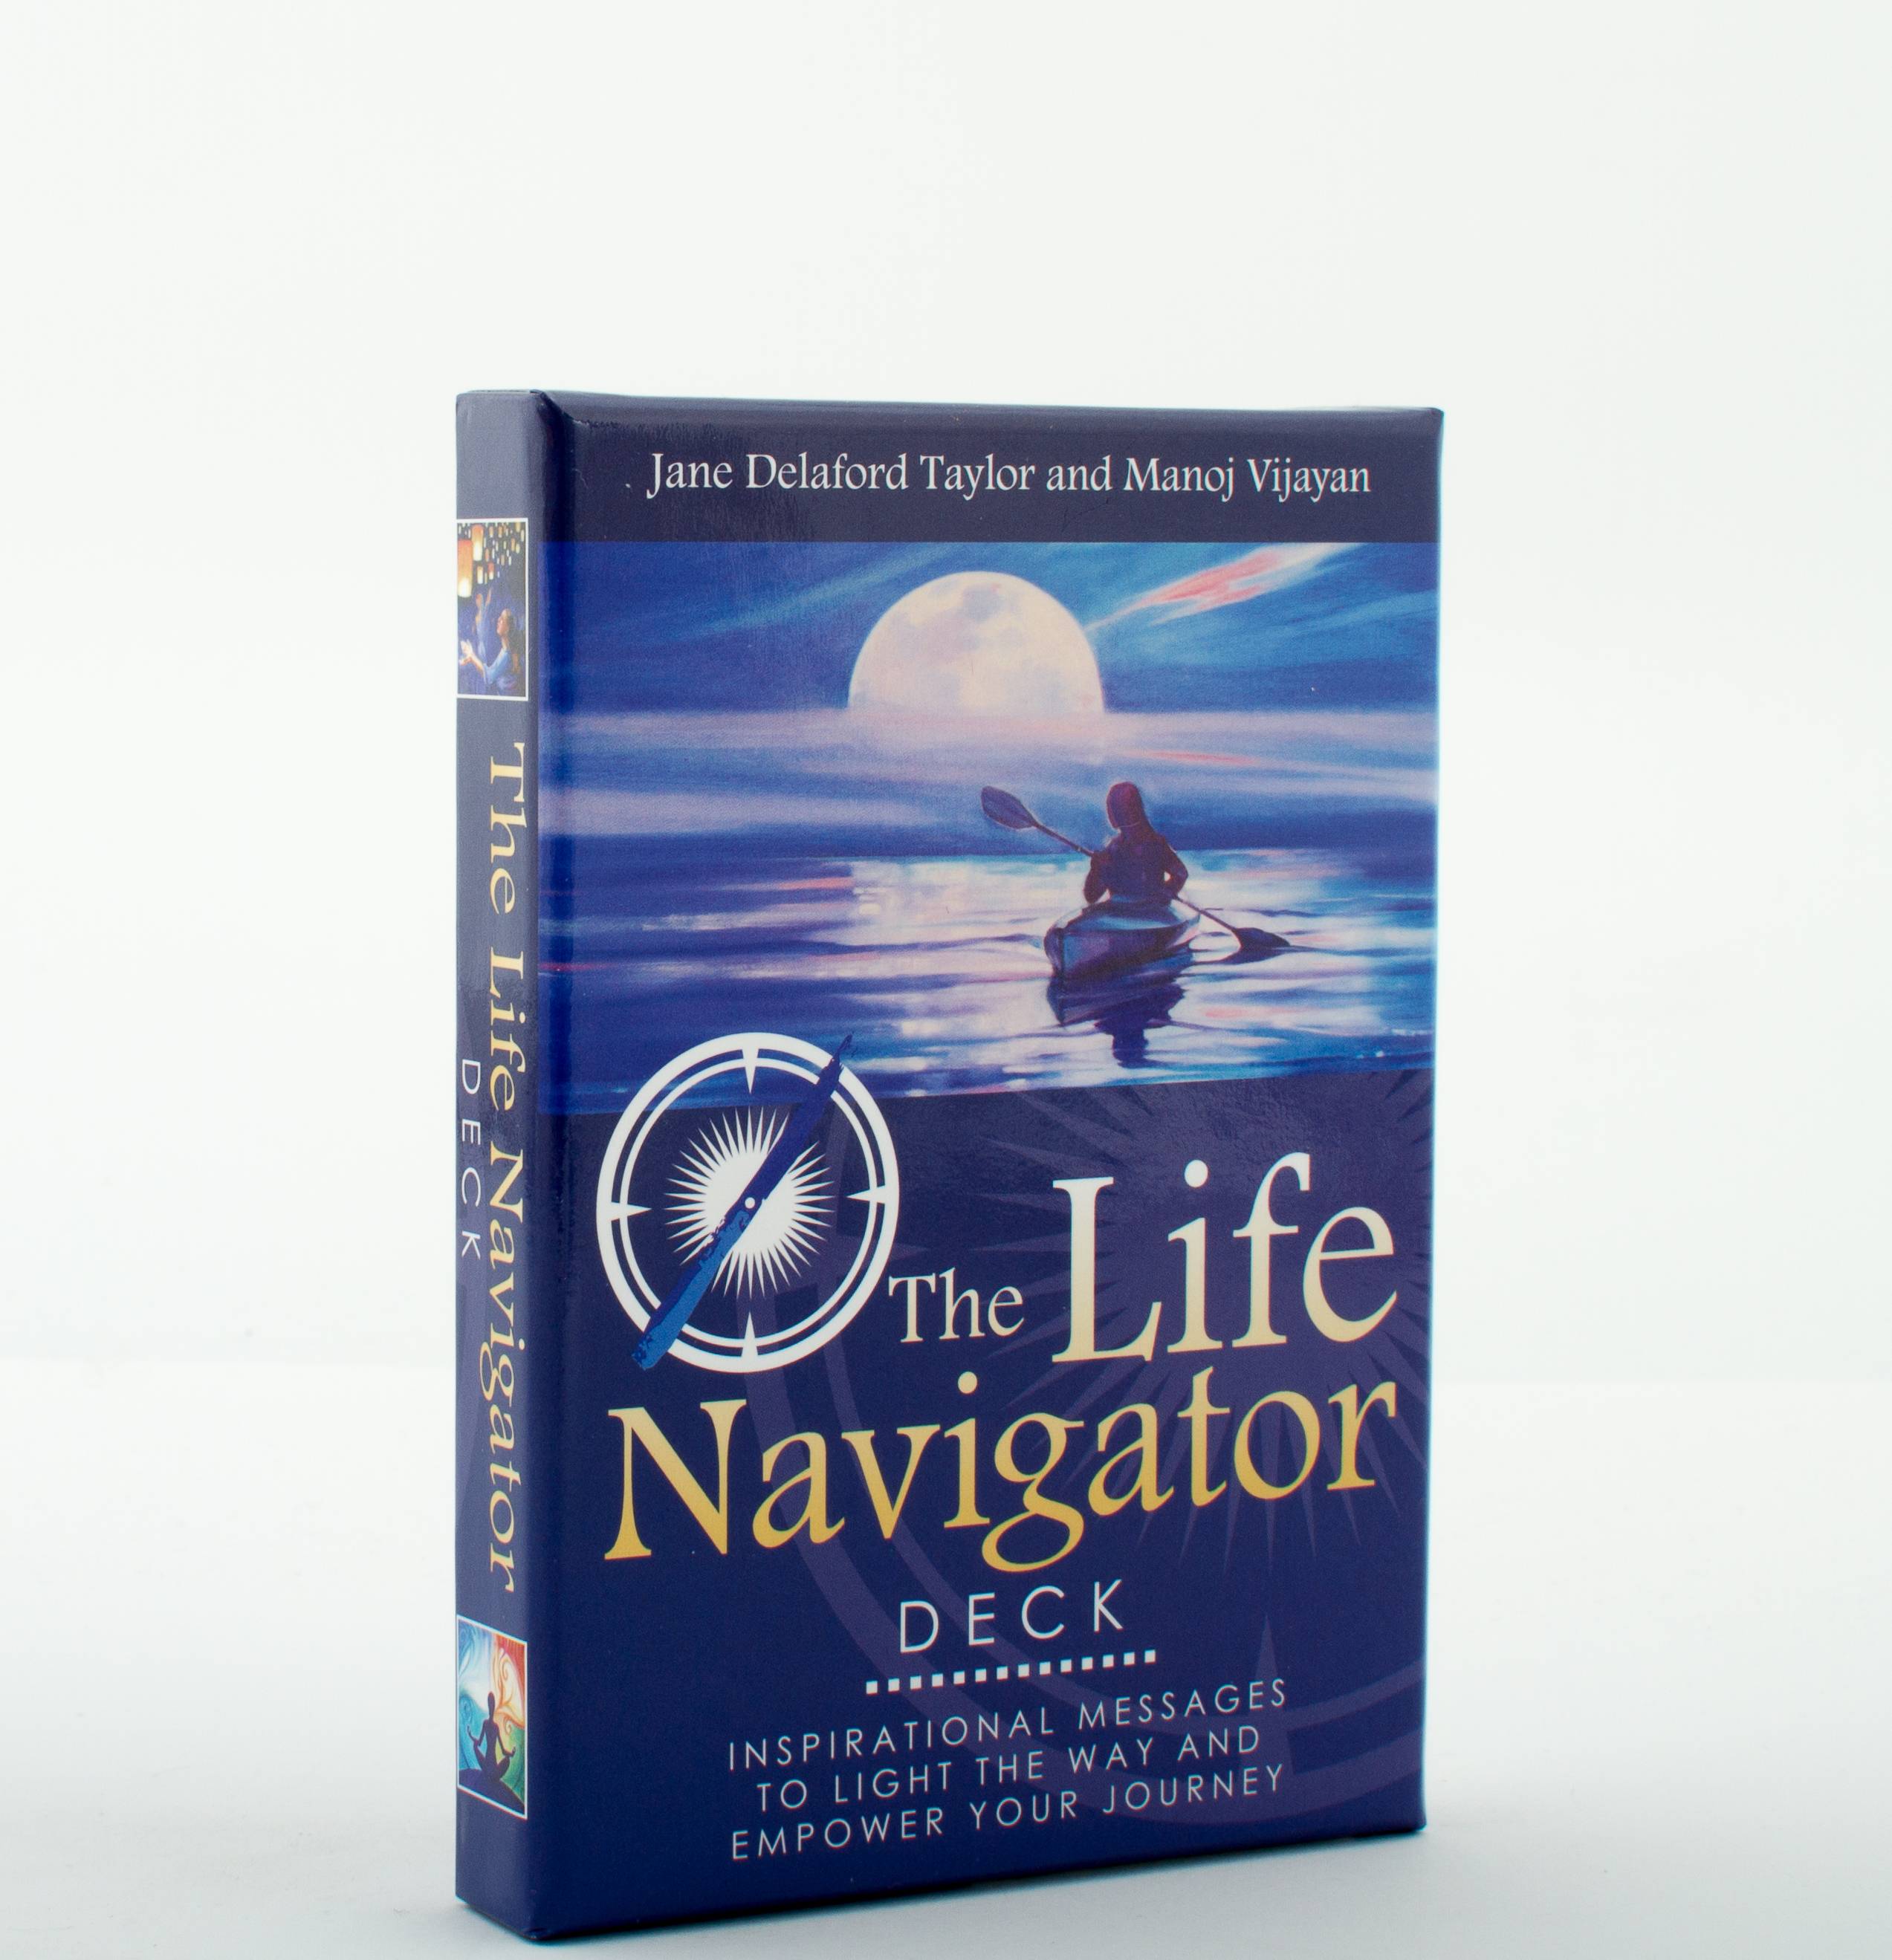 Life Navigator Deck : Inspirational Messages to Light the Way and Empower Your Journey